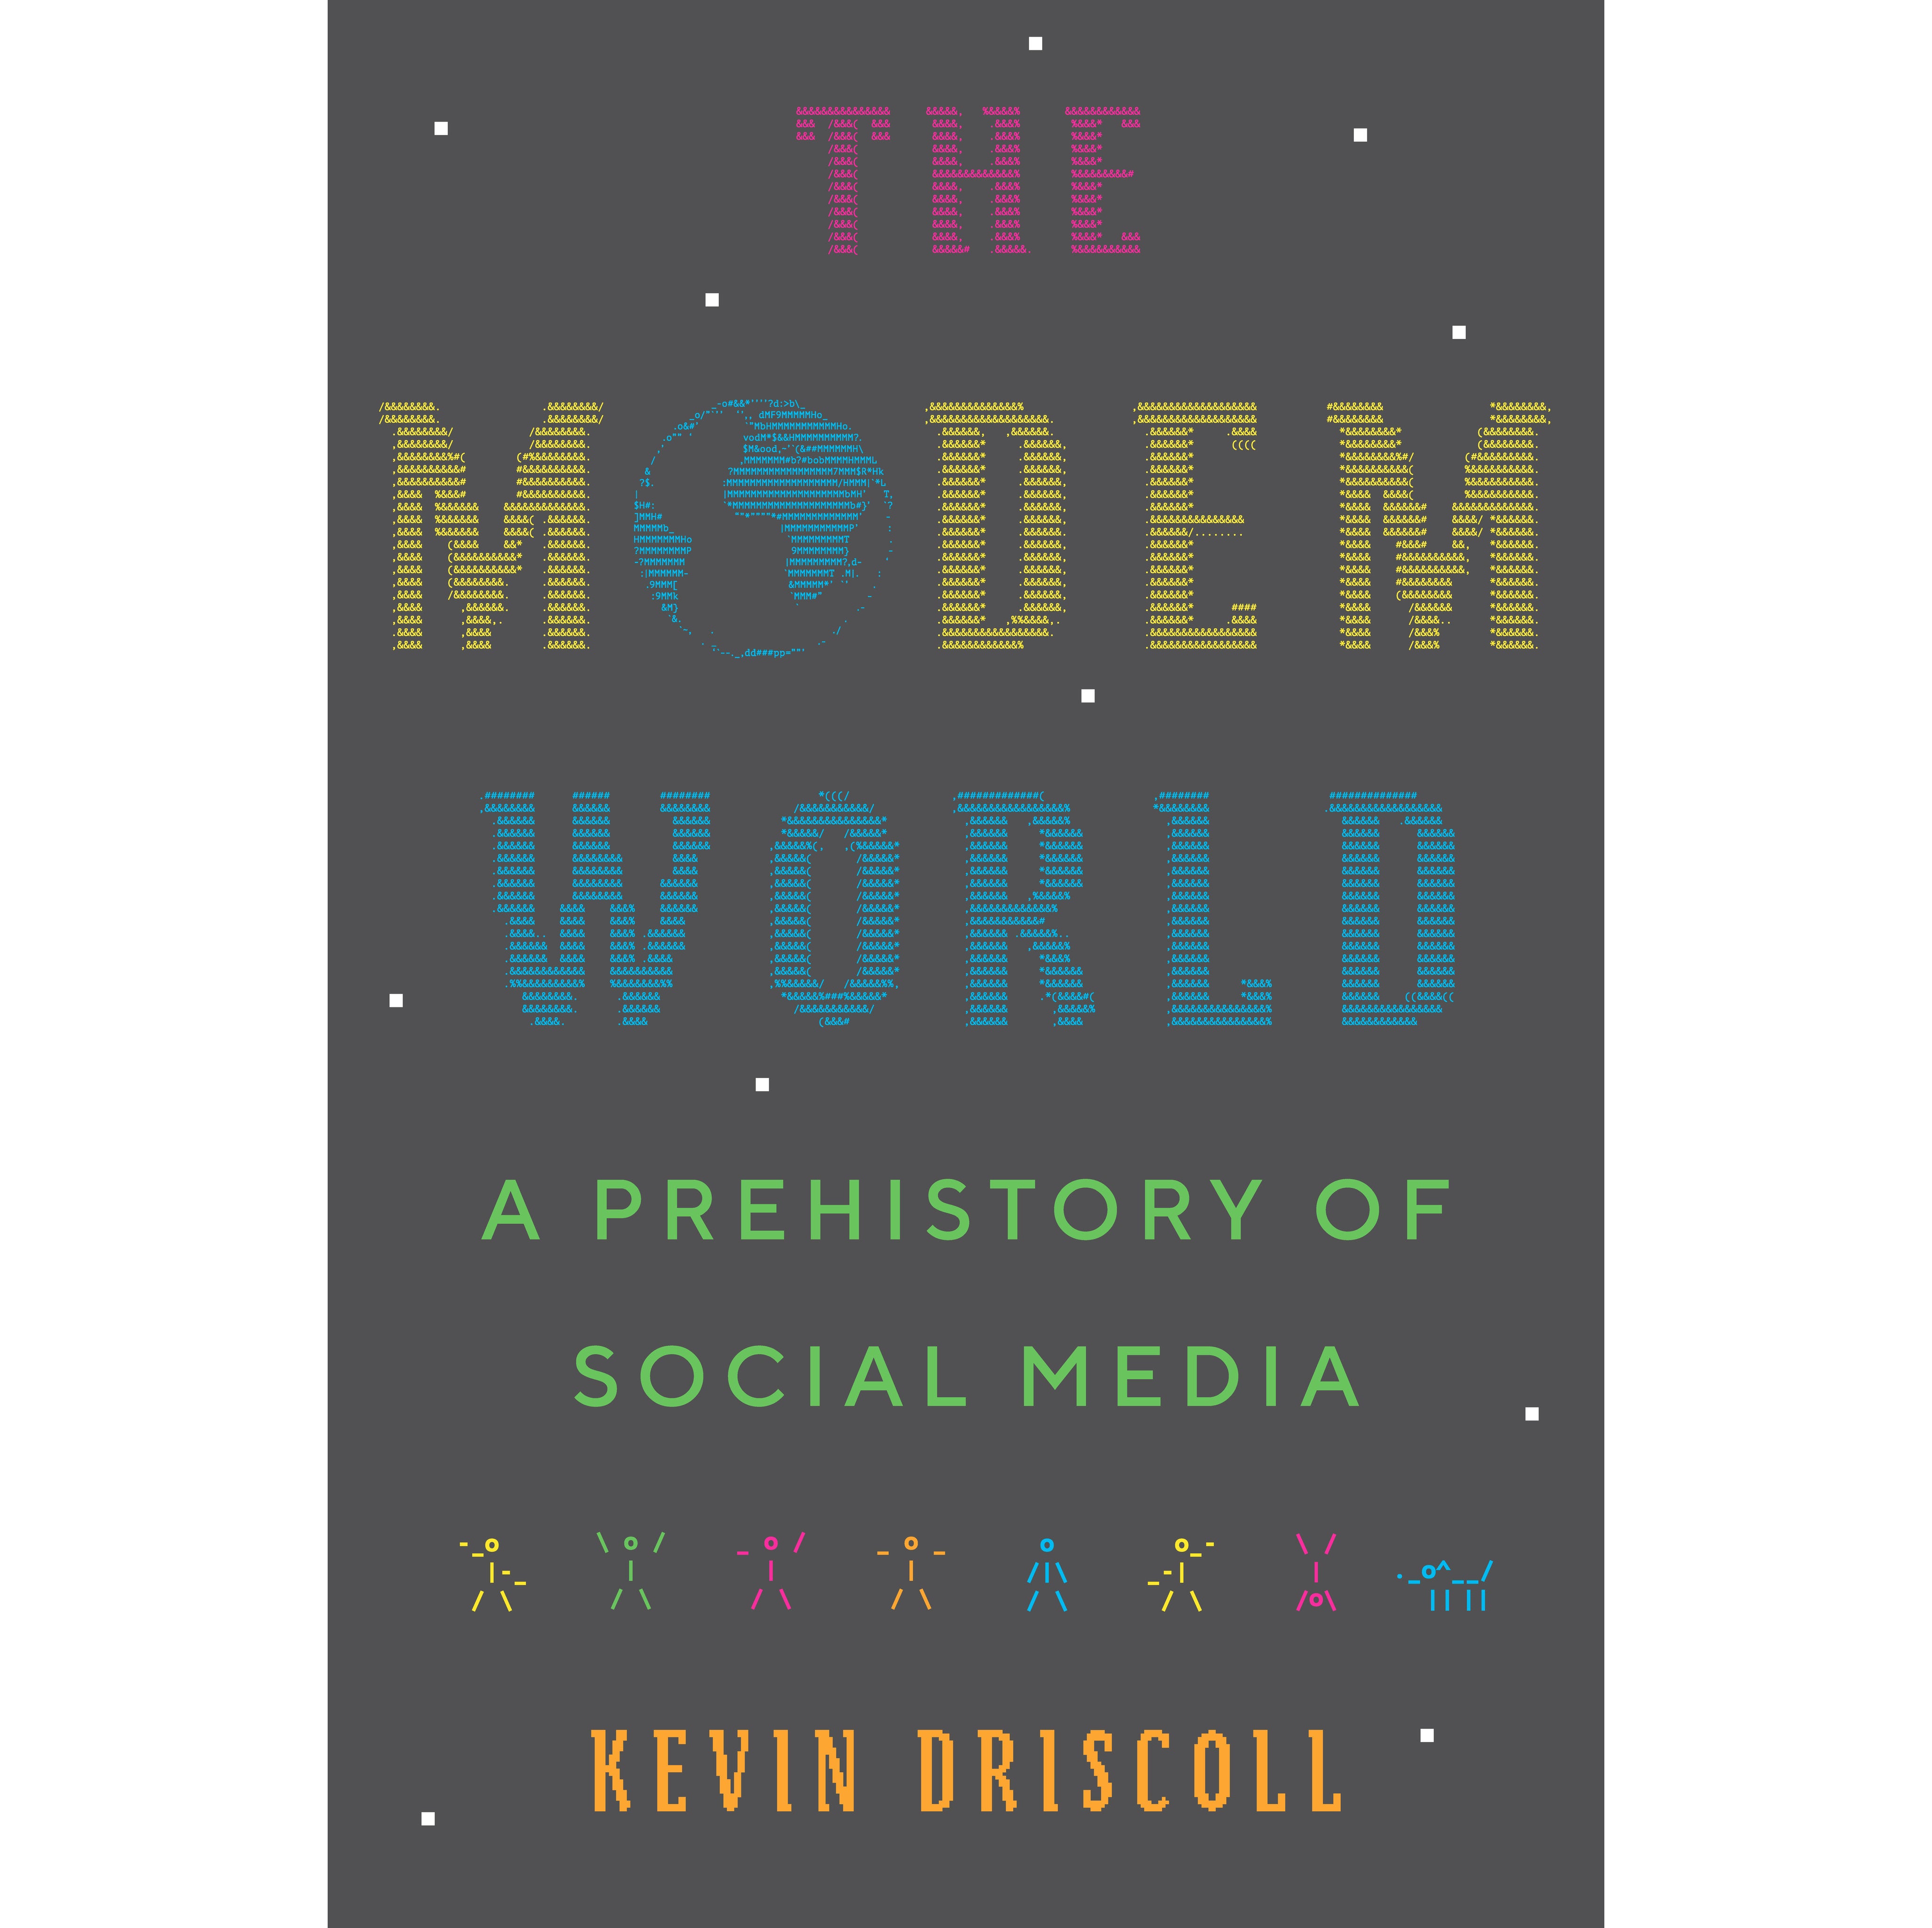 The cover of The Modem World: A Prehistory of Social Media by Kevin Driscoll; the background is black and the book title and author name are old-internet-style fonts. 